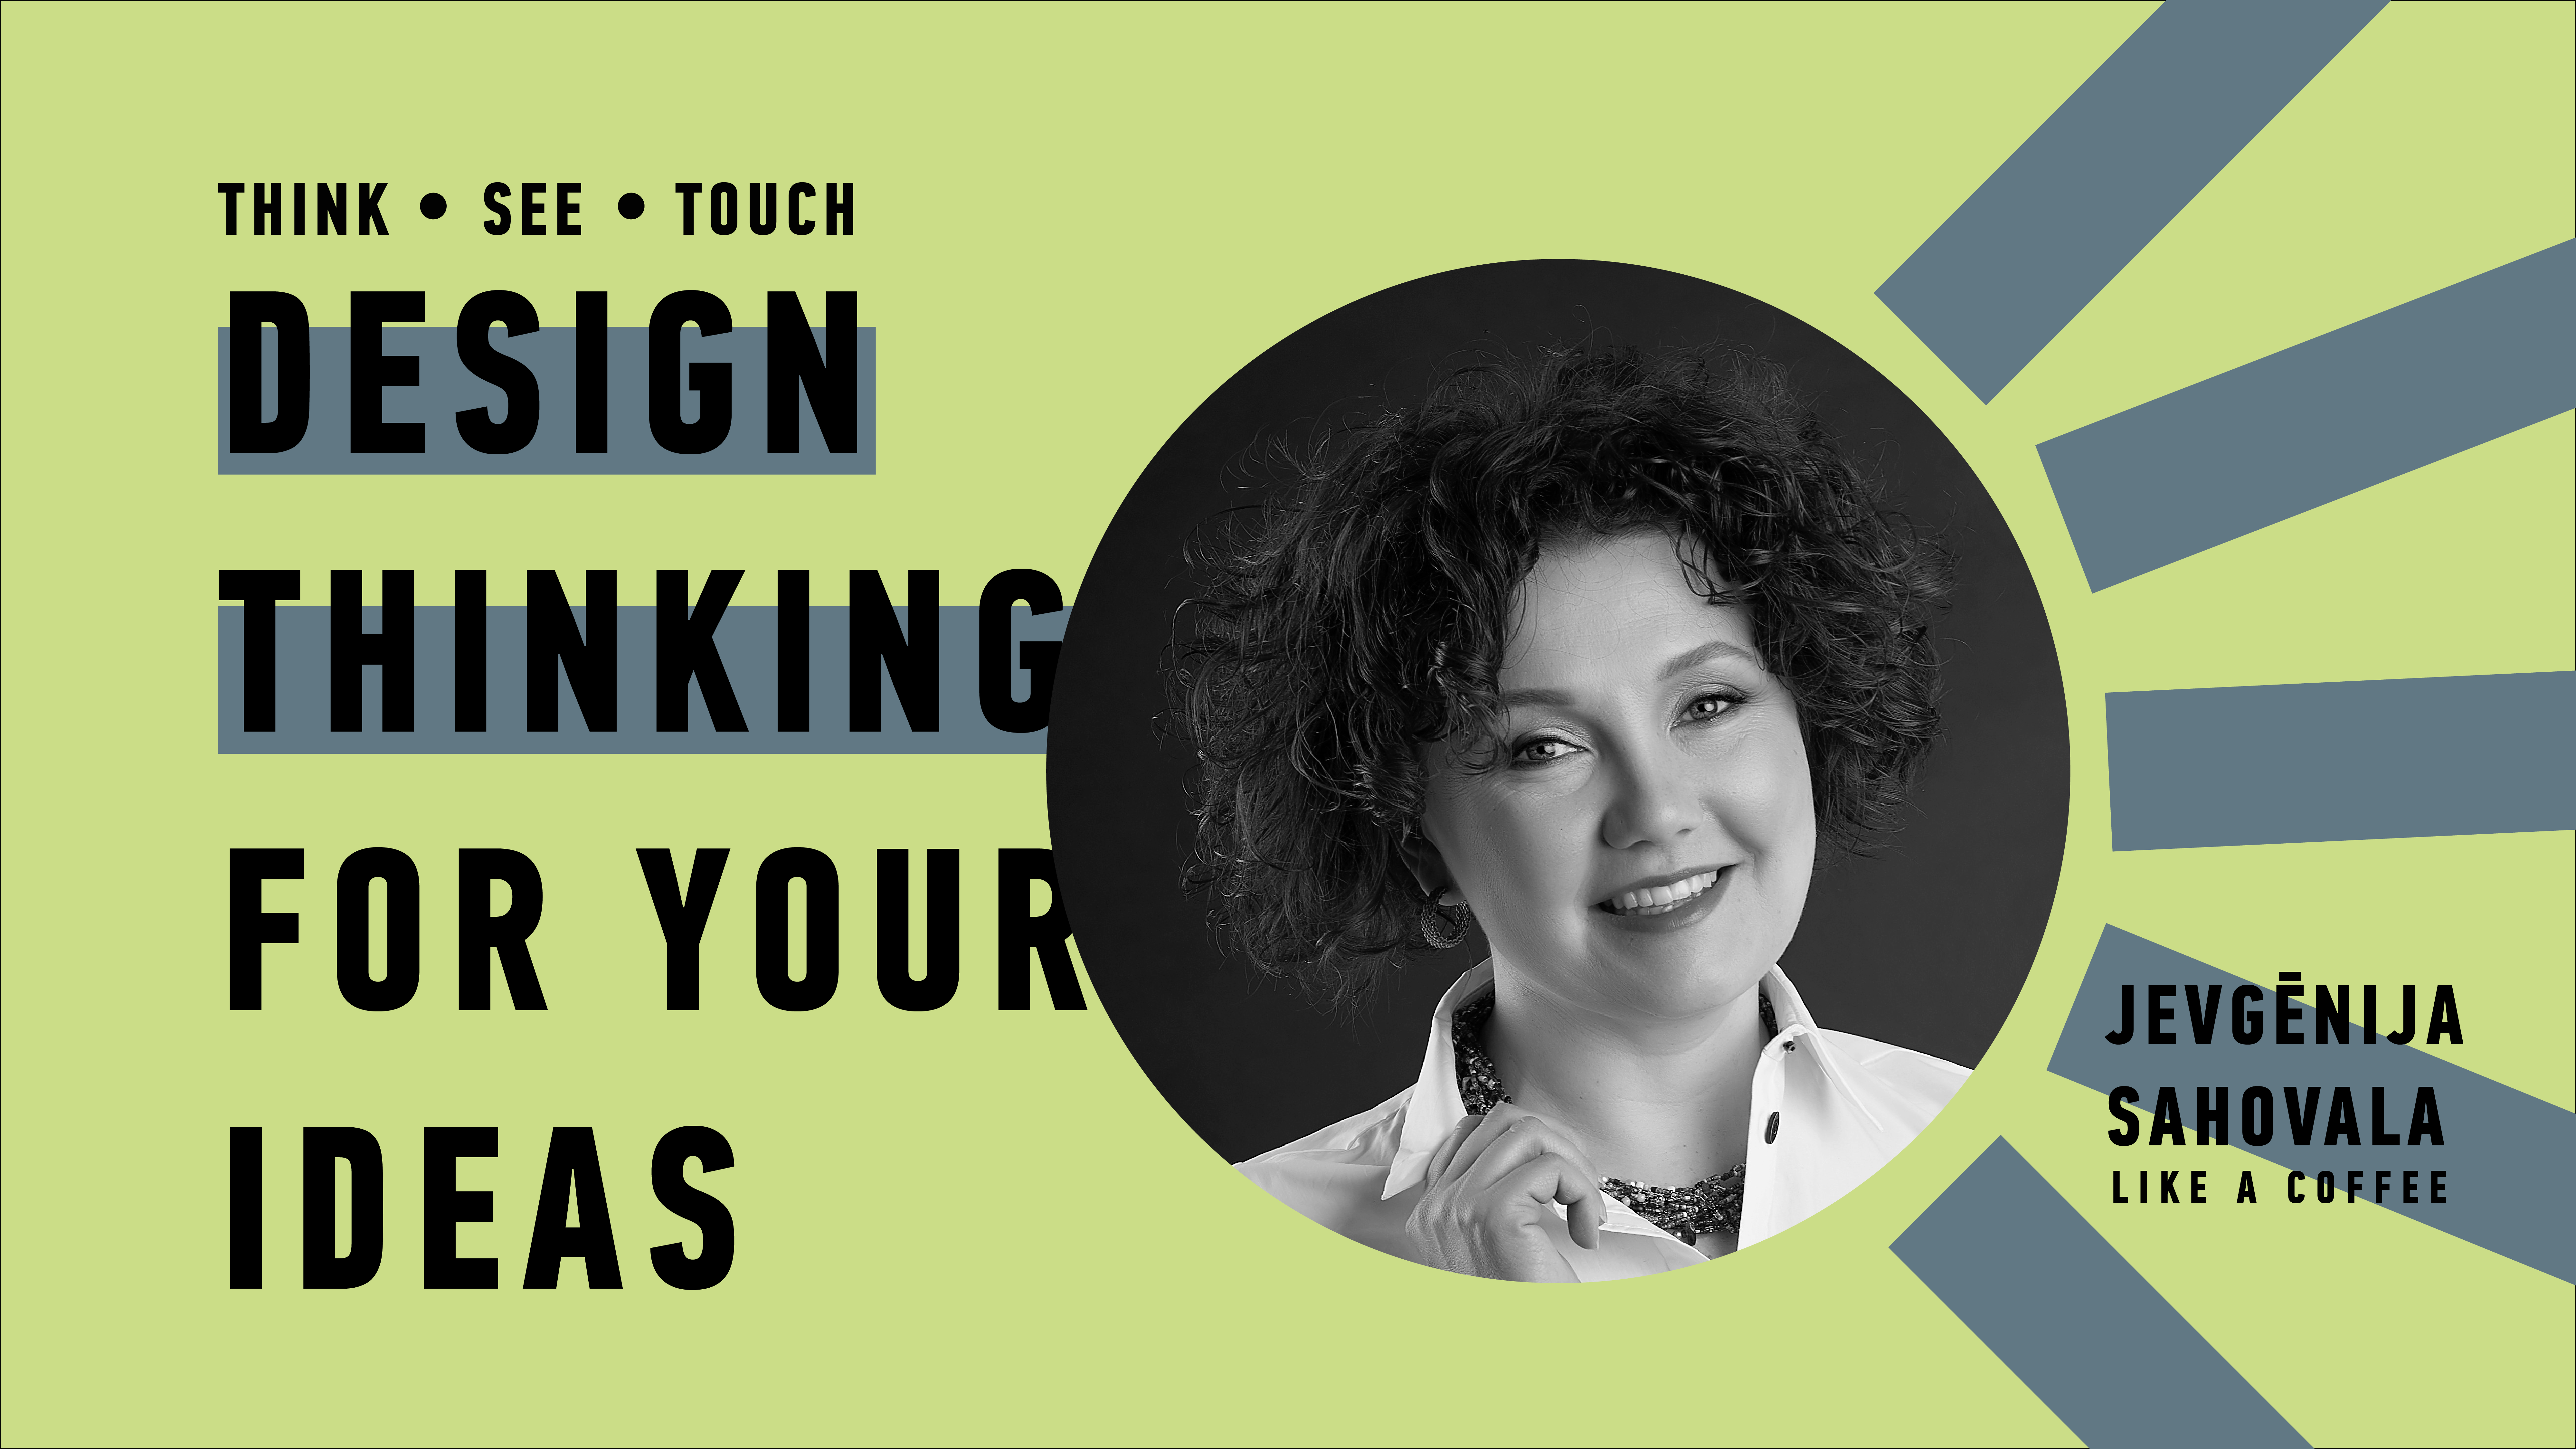 Think - see - touch. Design Thinking for Your Ideas.